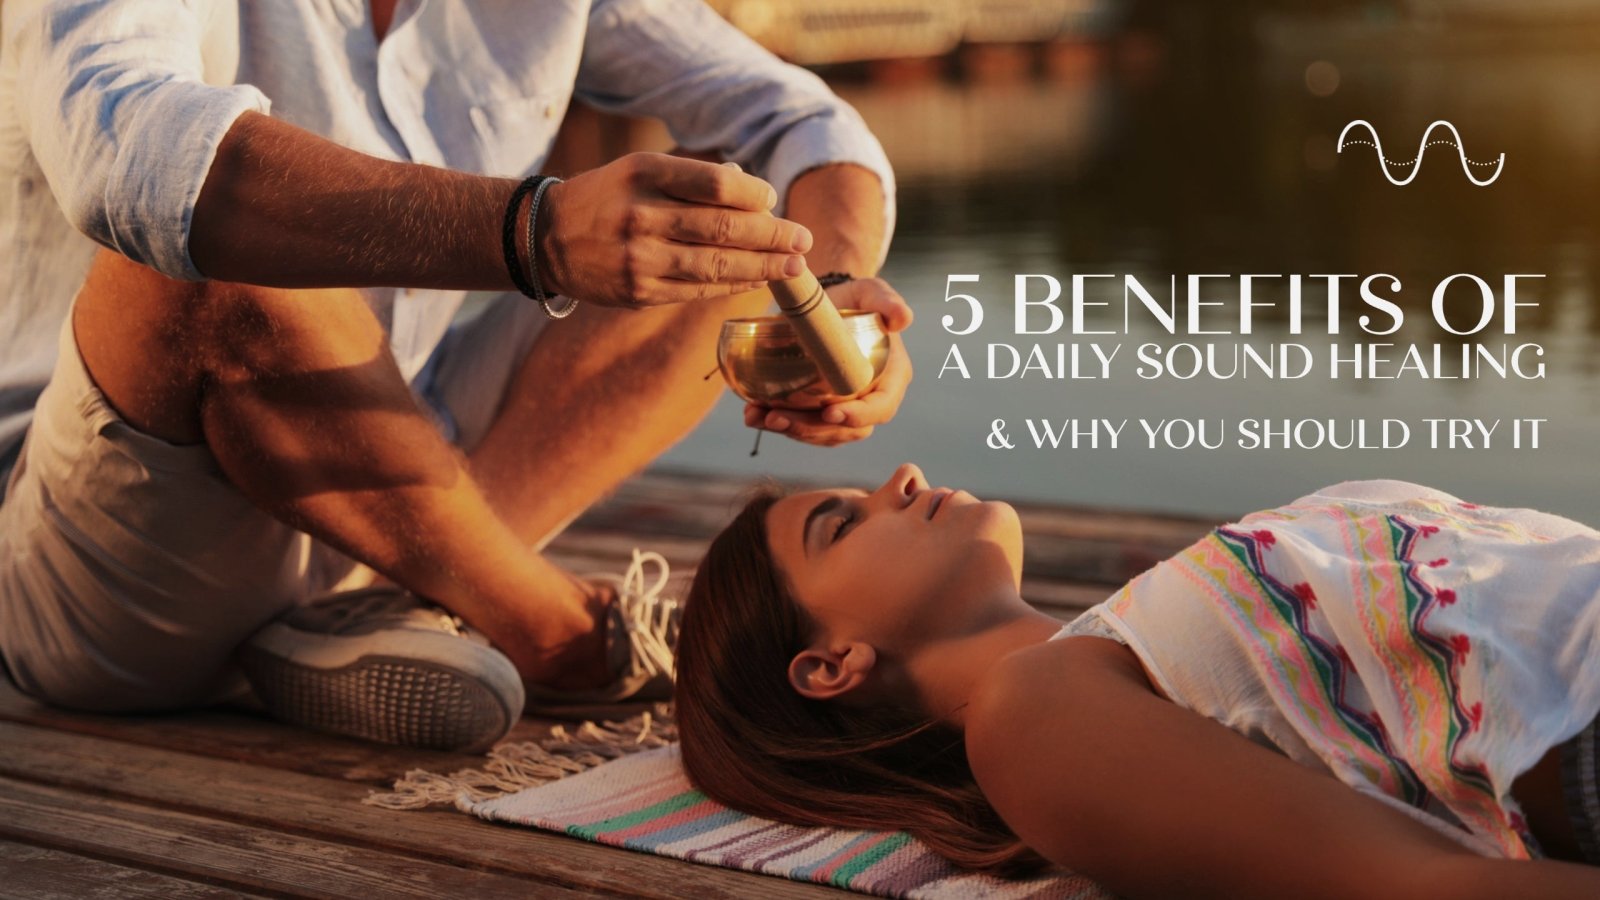 5 Benefits of a Daily Sound Healing Practice - Sound Healing LAB